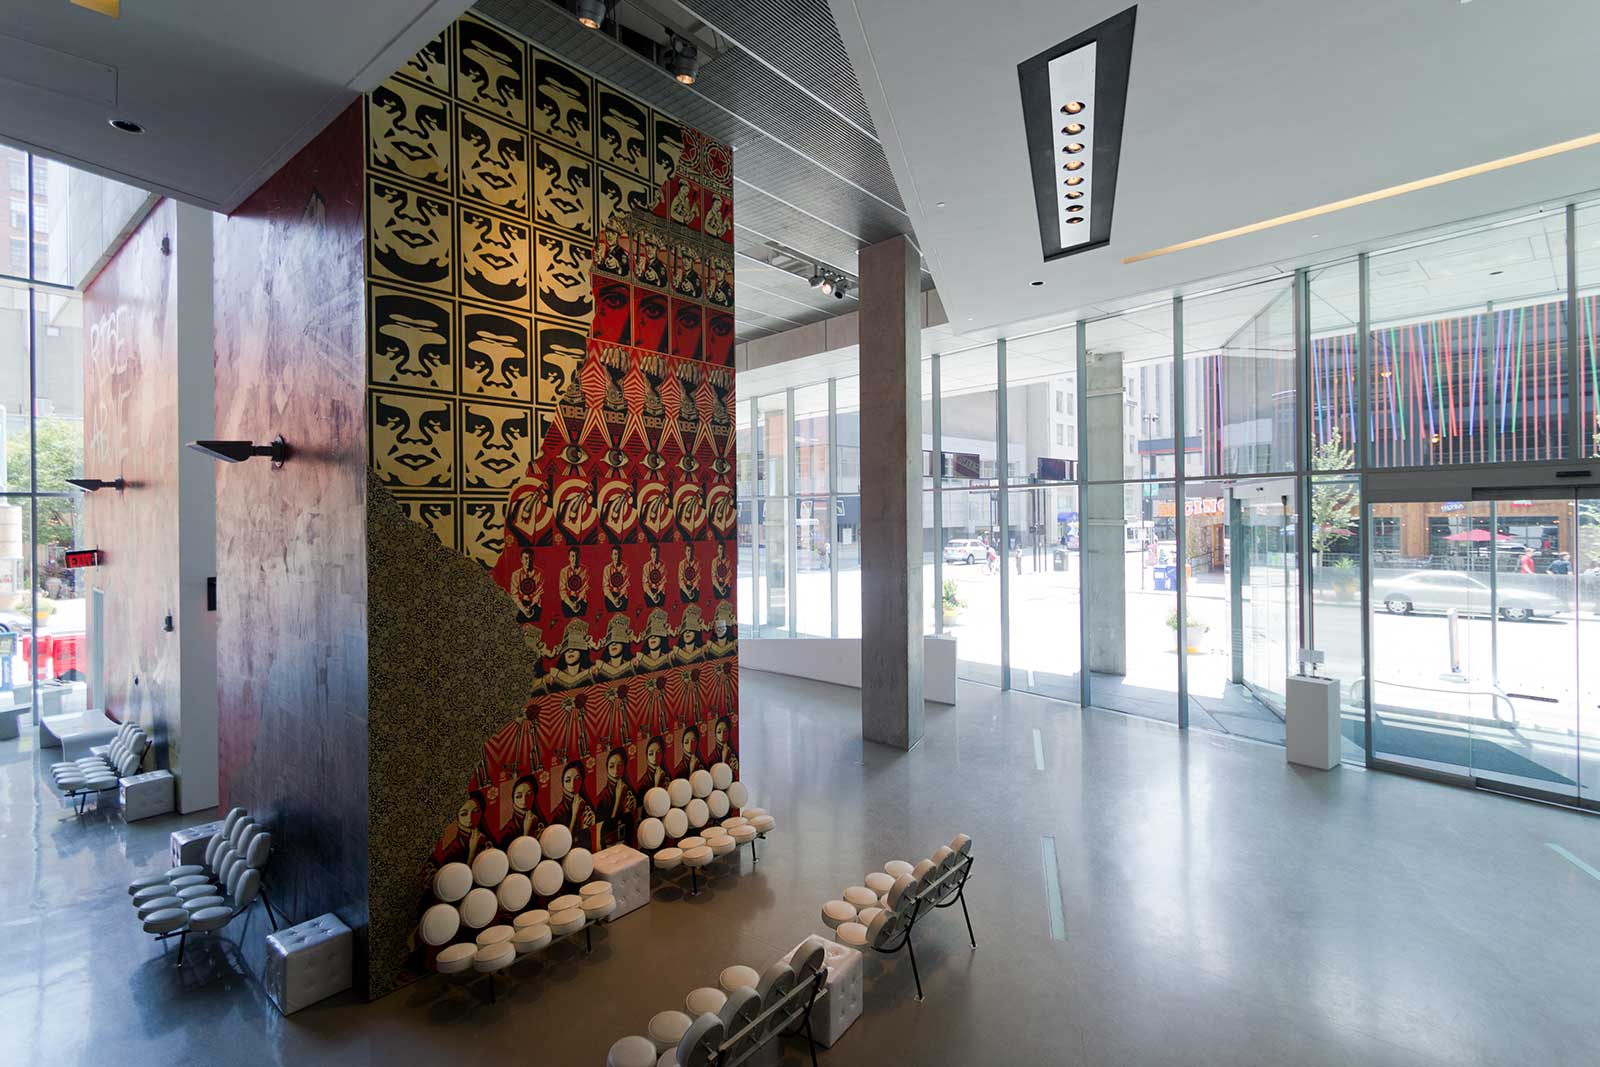 Interior photograph of the Lois & Richard Rosenthal Center for Contemporary Art.